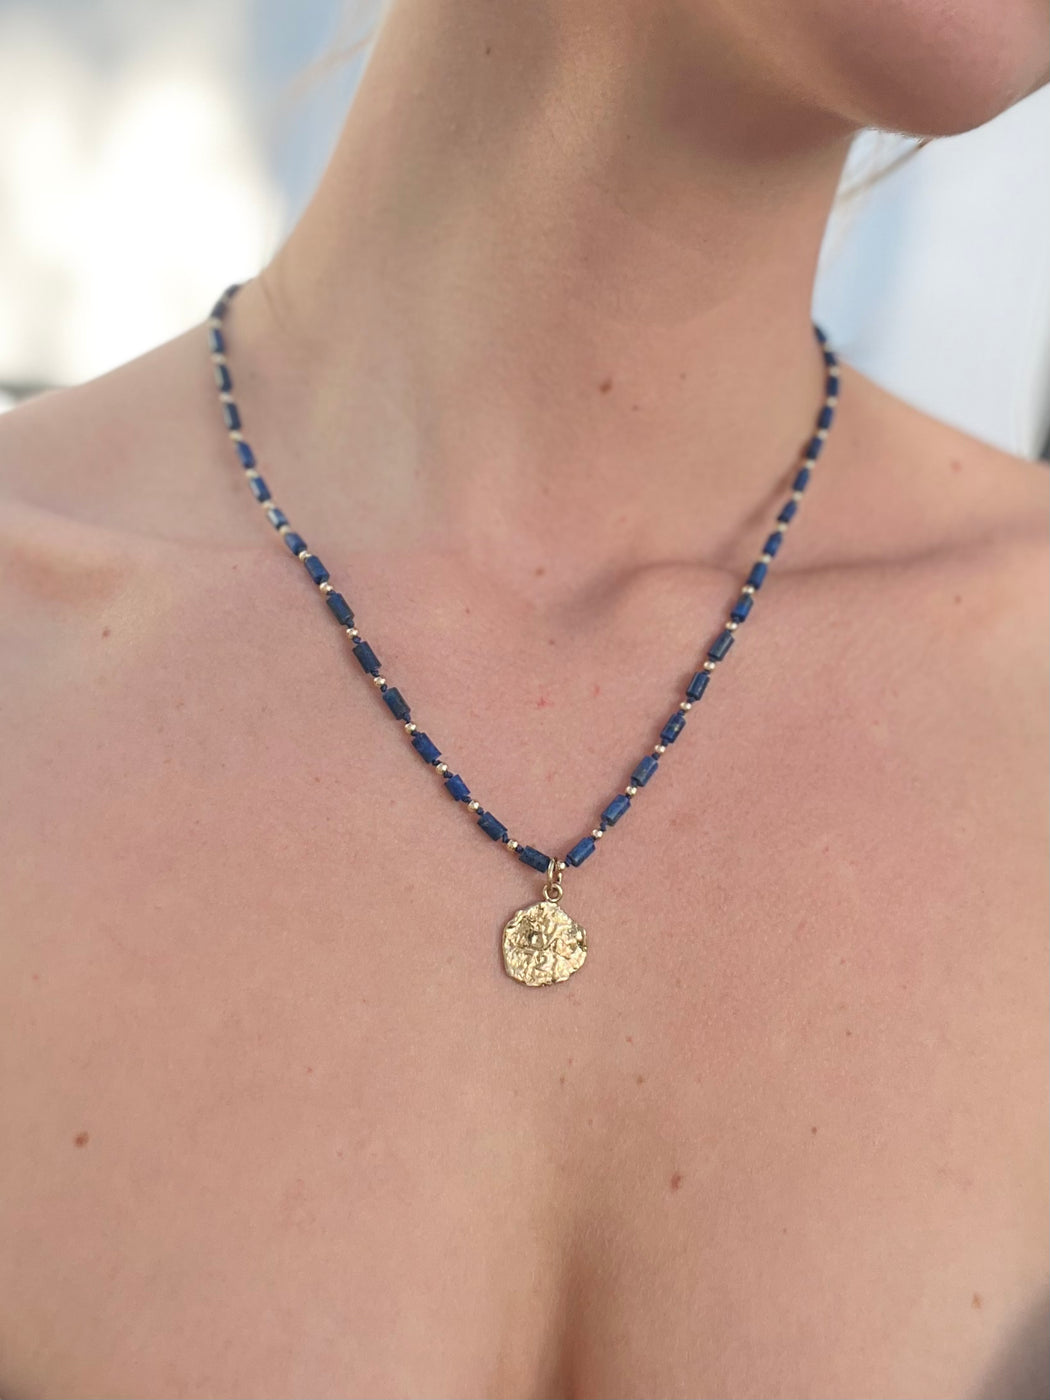 You know the way. Open pathways to your most ancient wisdom with delicate lapis lazuli, beaded along with gold accents. Transcend time through the portal of the Roman gold coin. hand knotted silk chord necklace designed by Carrie Marill 